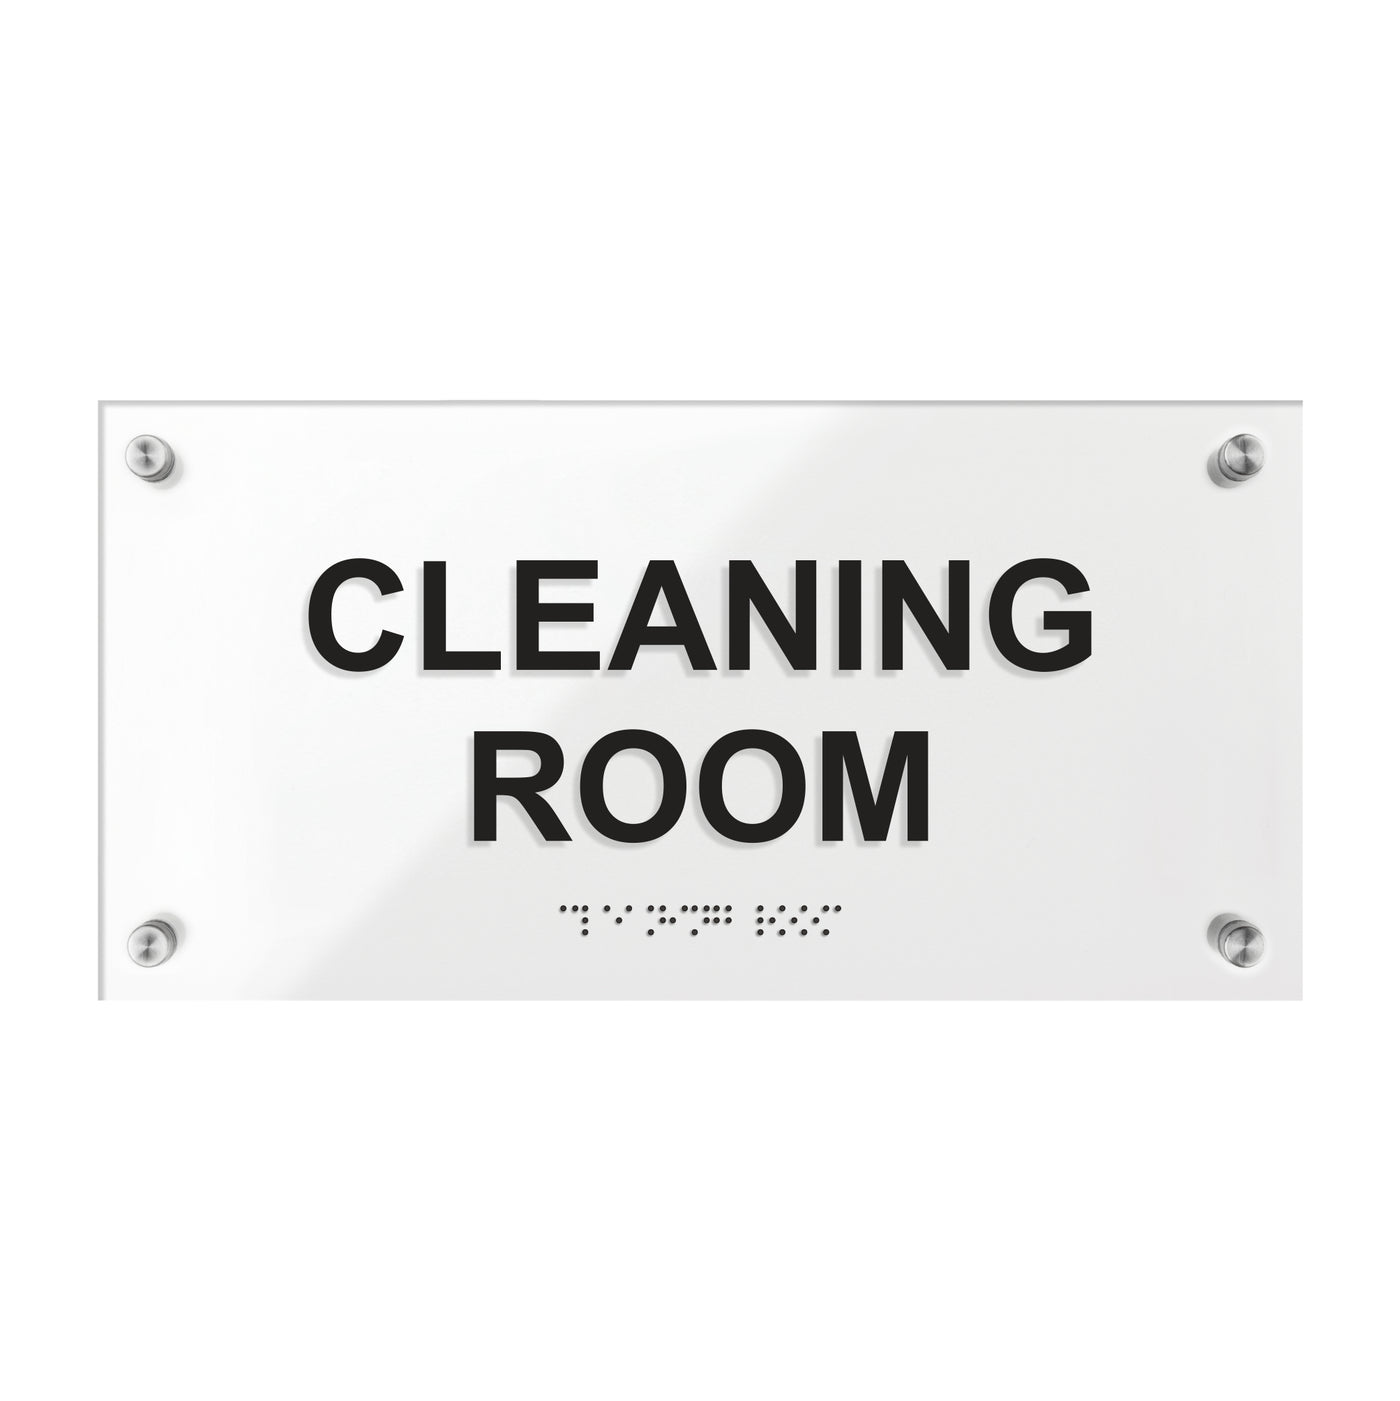 Acrylic Cleaning Room Sign with Braille - "Classic" Design